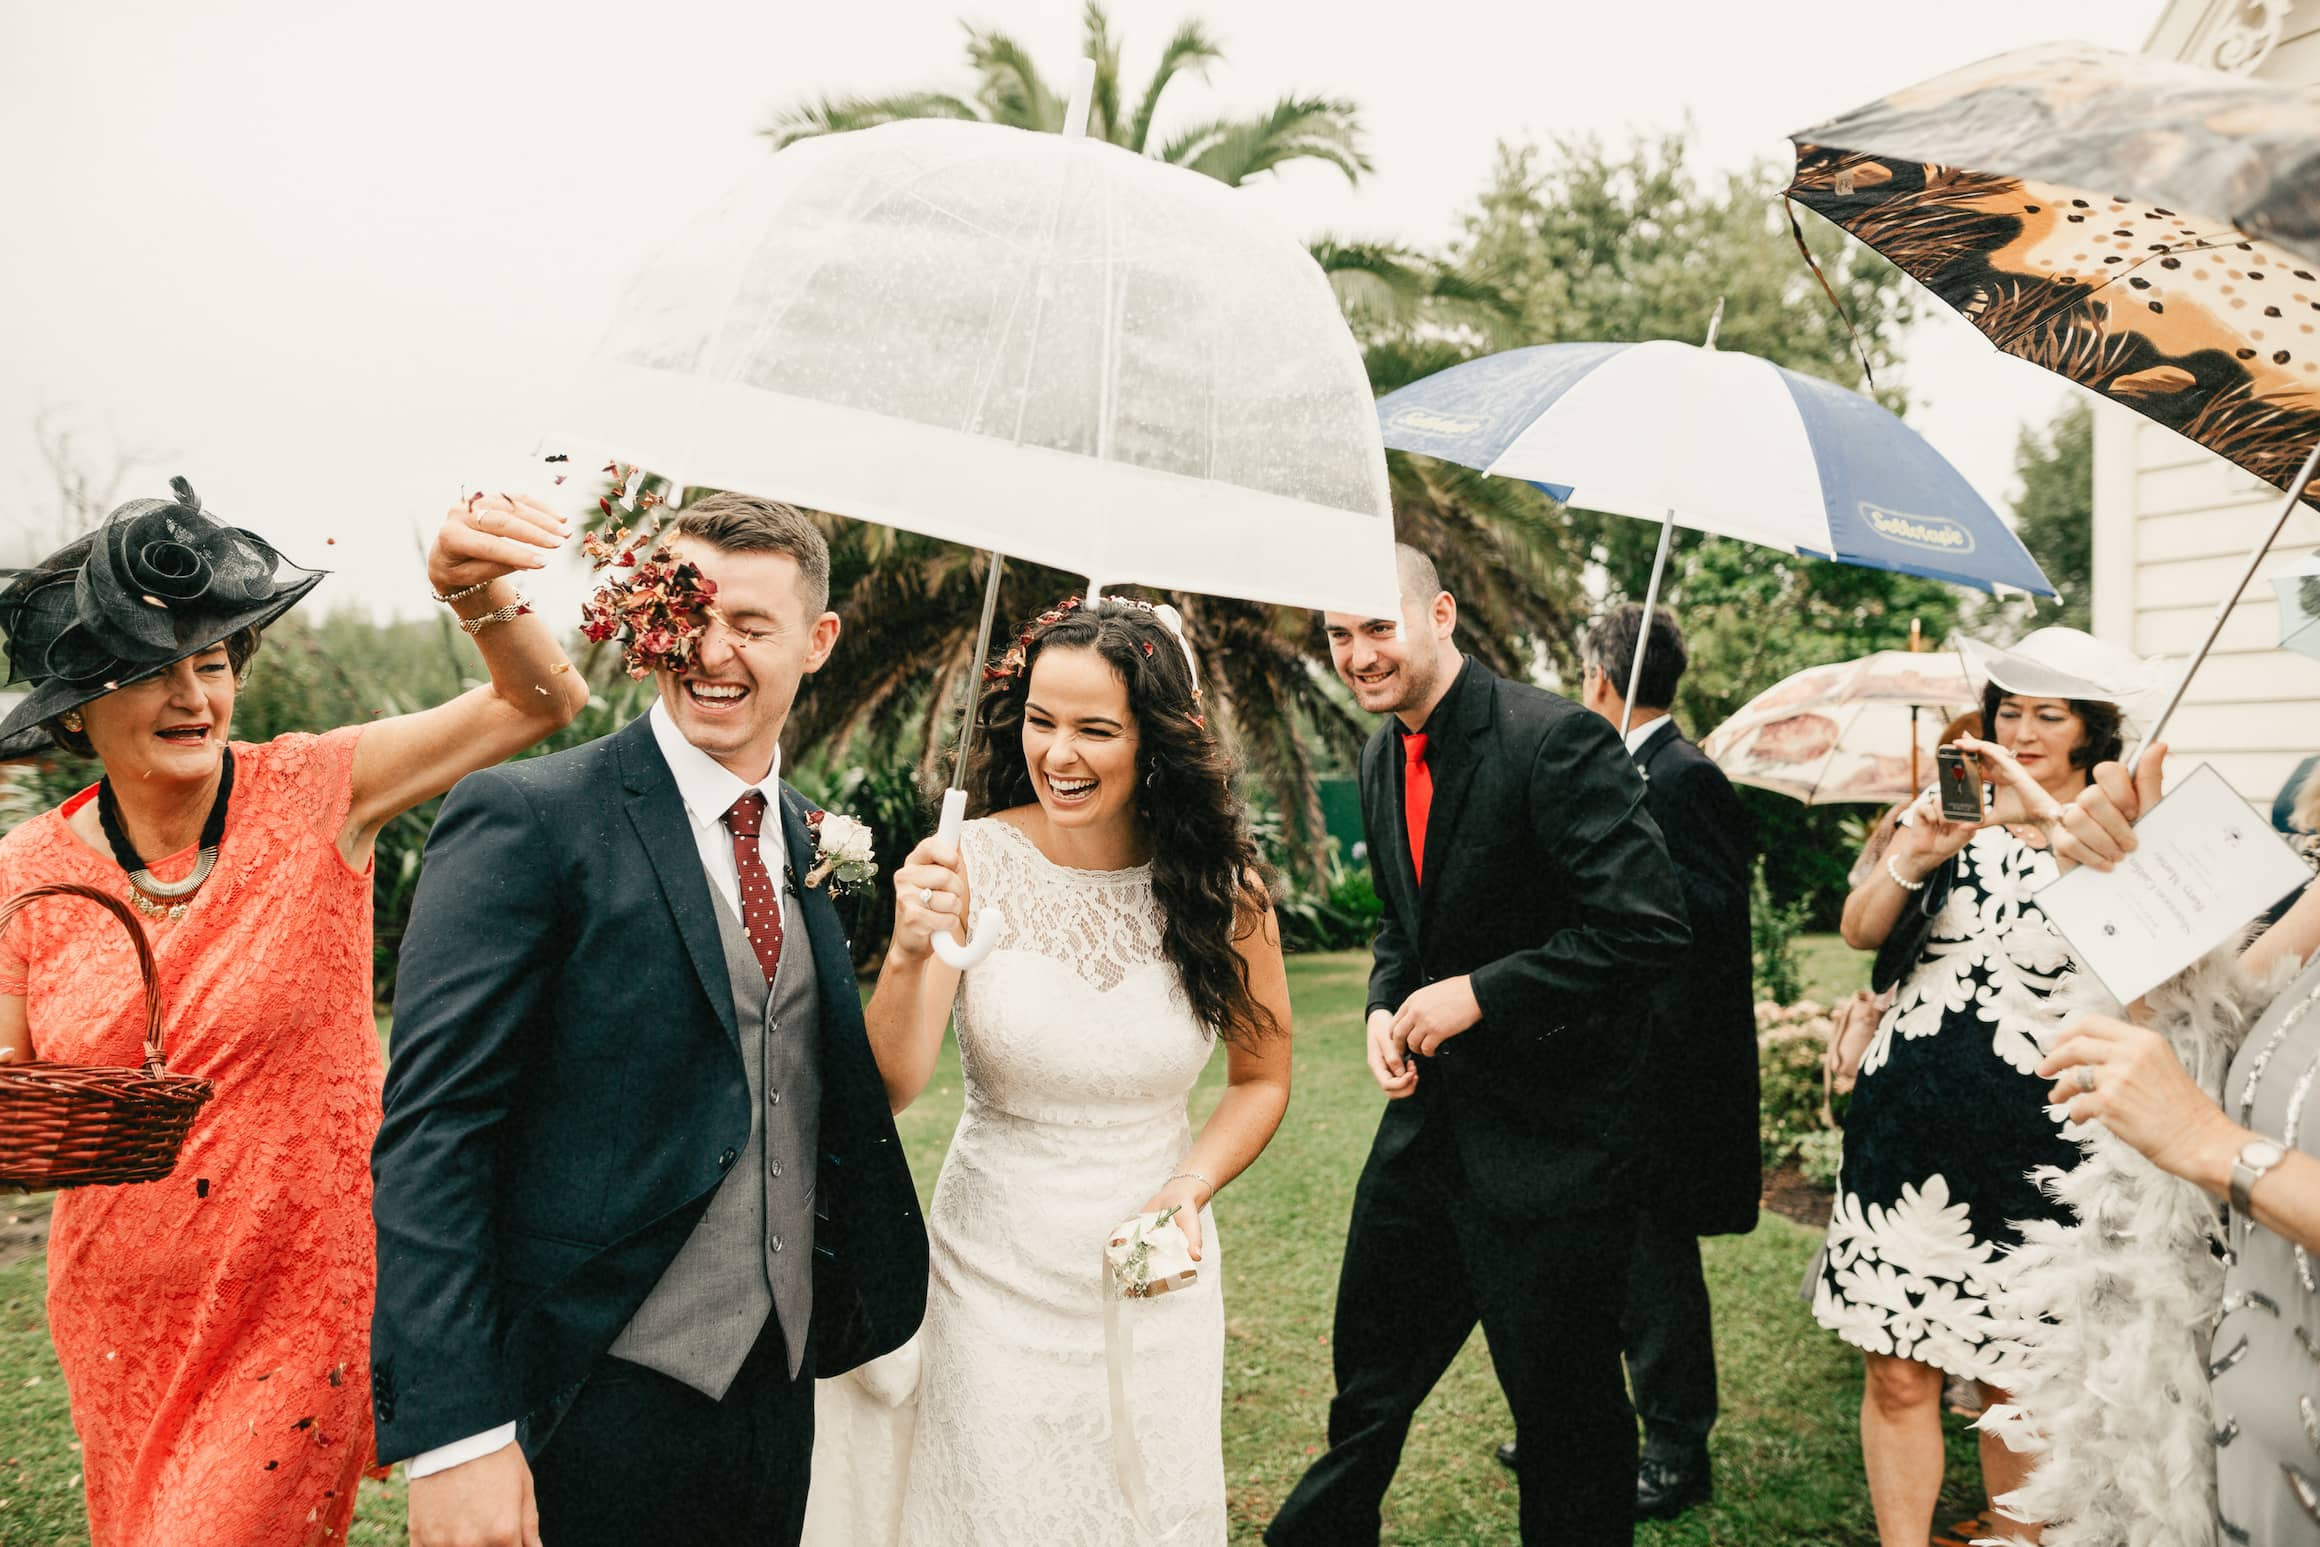 A Complete Guide to Getting Married in the Summer